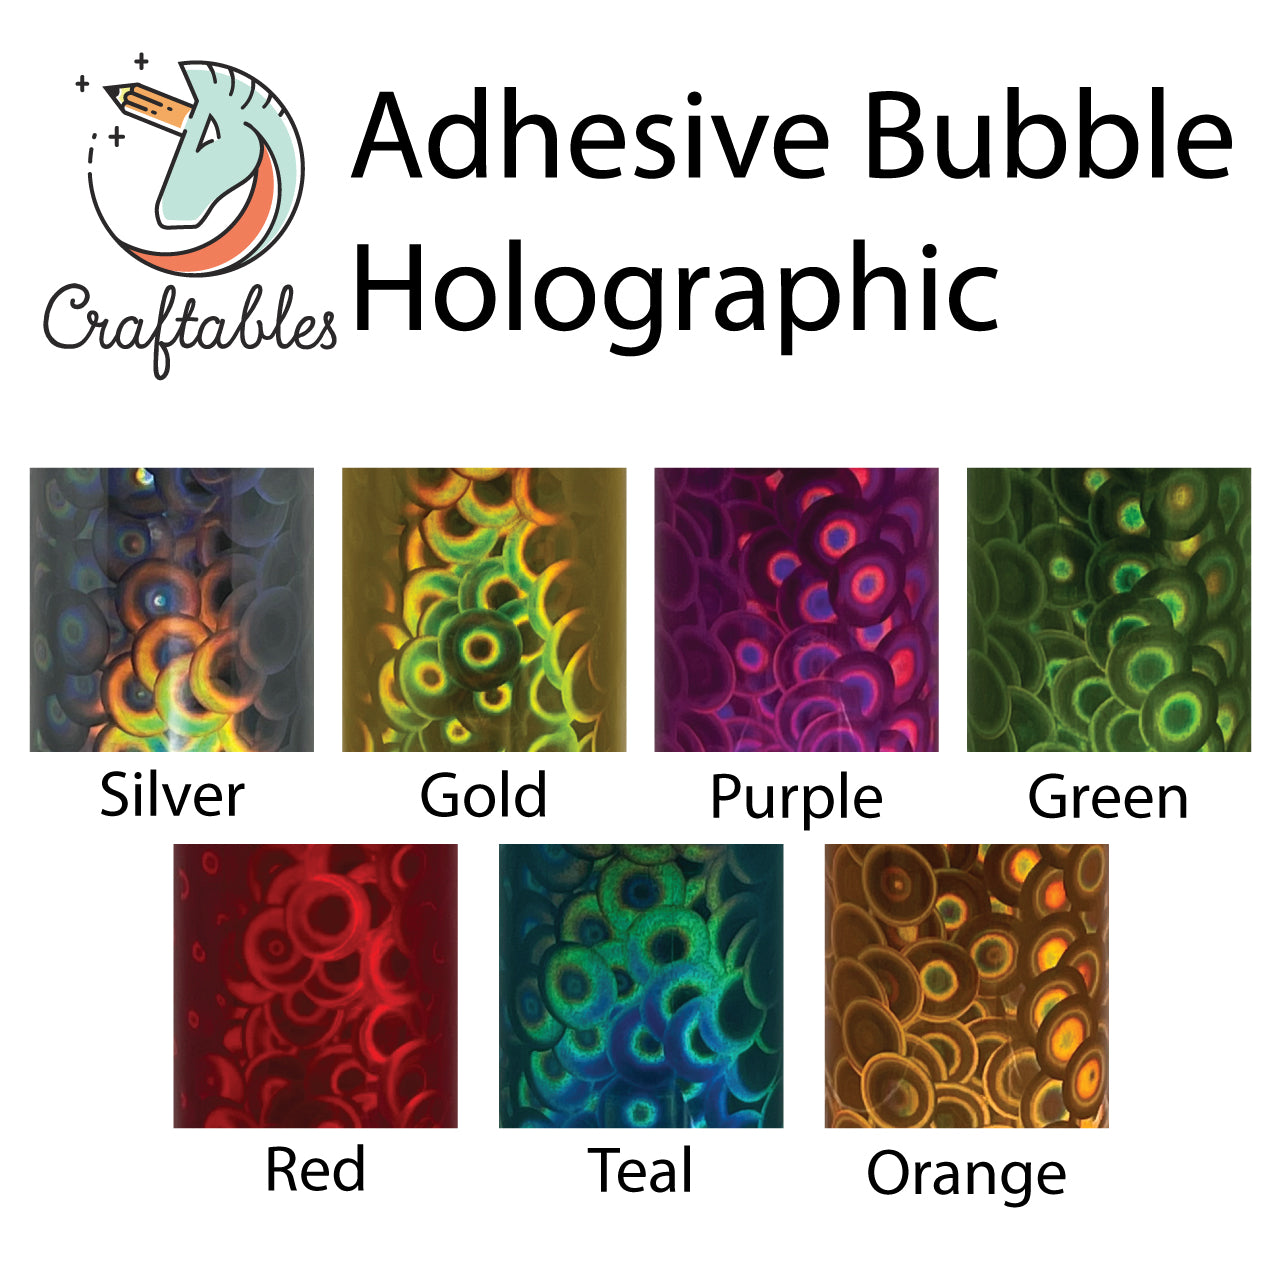 Purple Bubble Holographic Adhesive Vinyl Rolls By Craftables